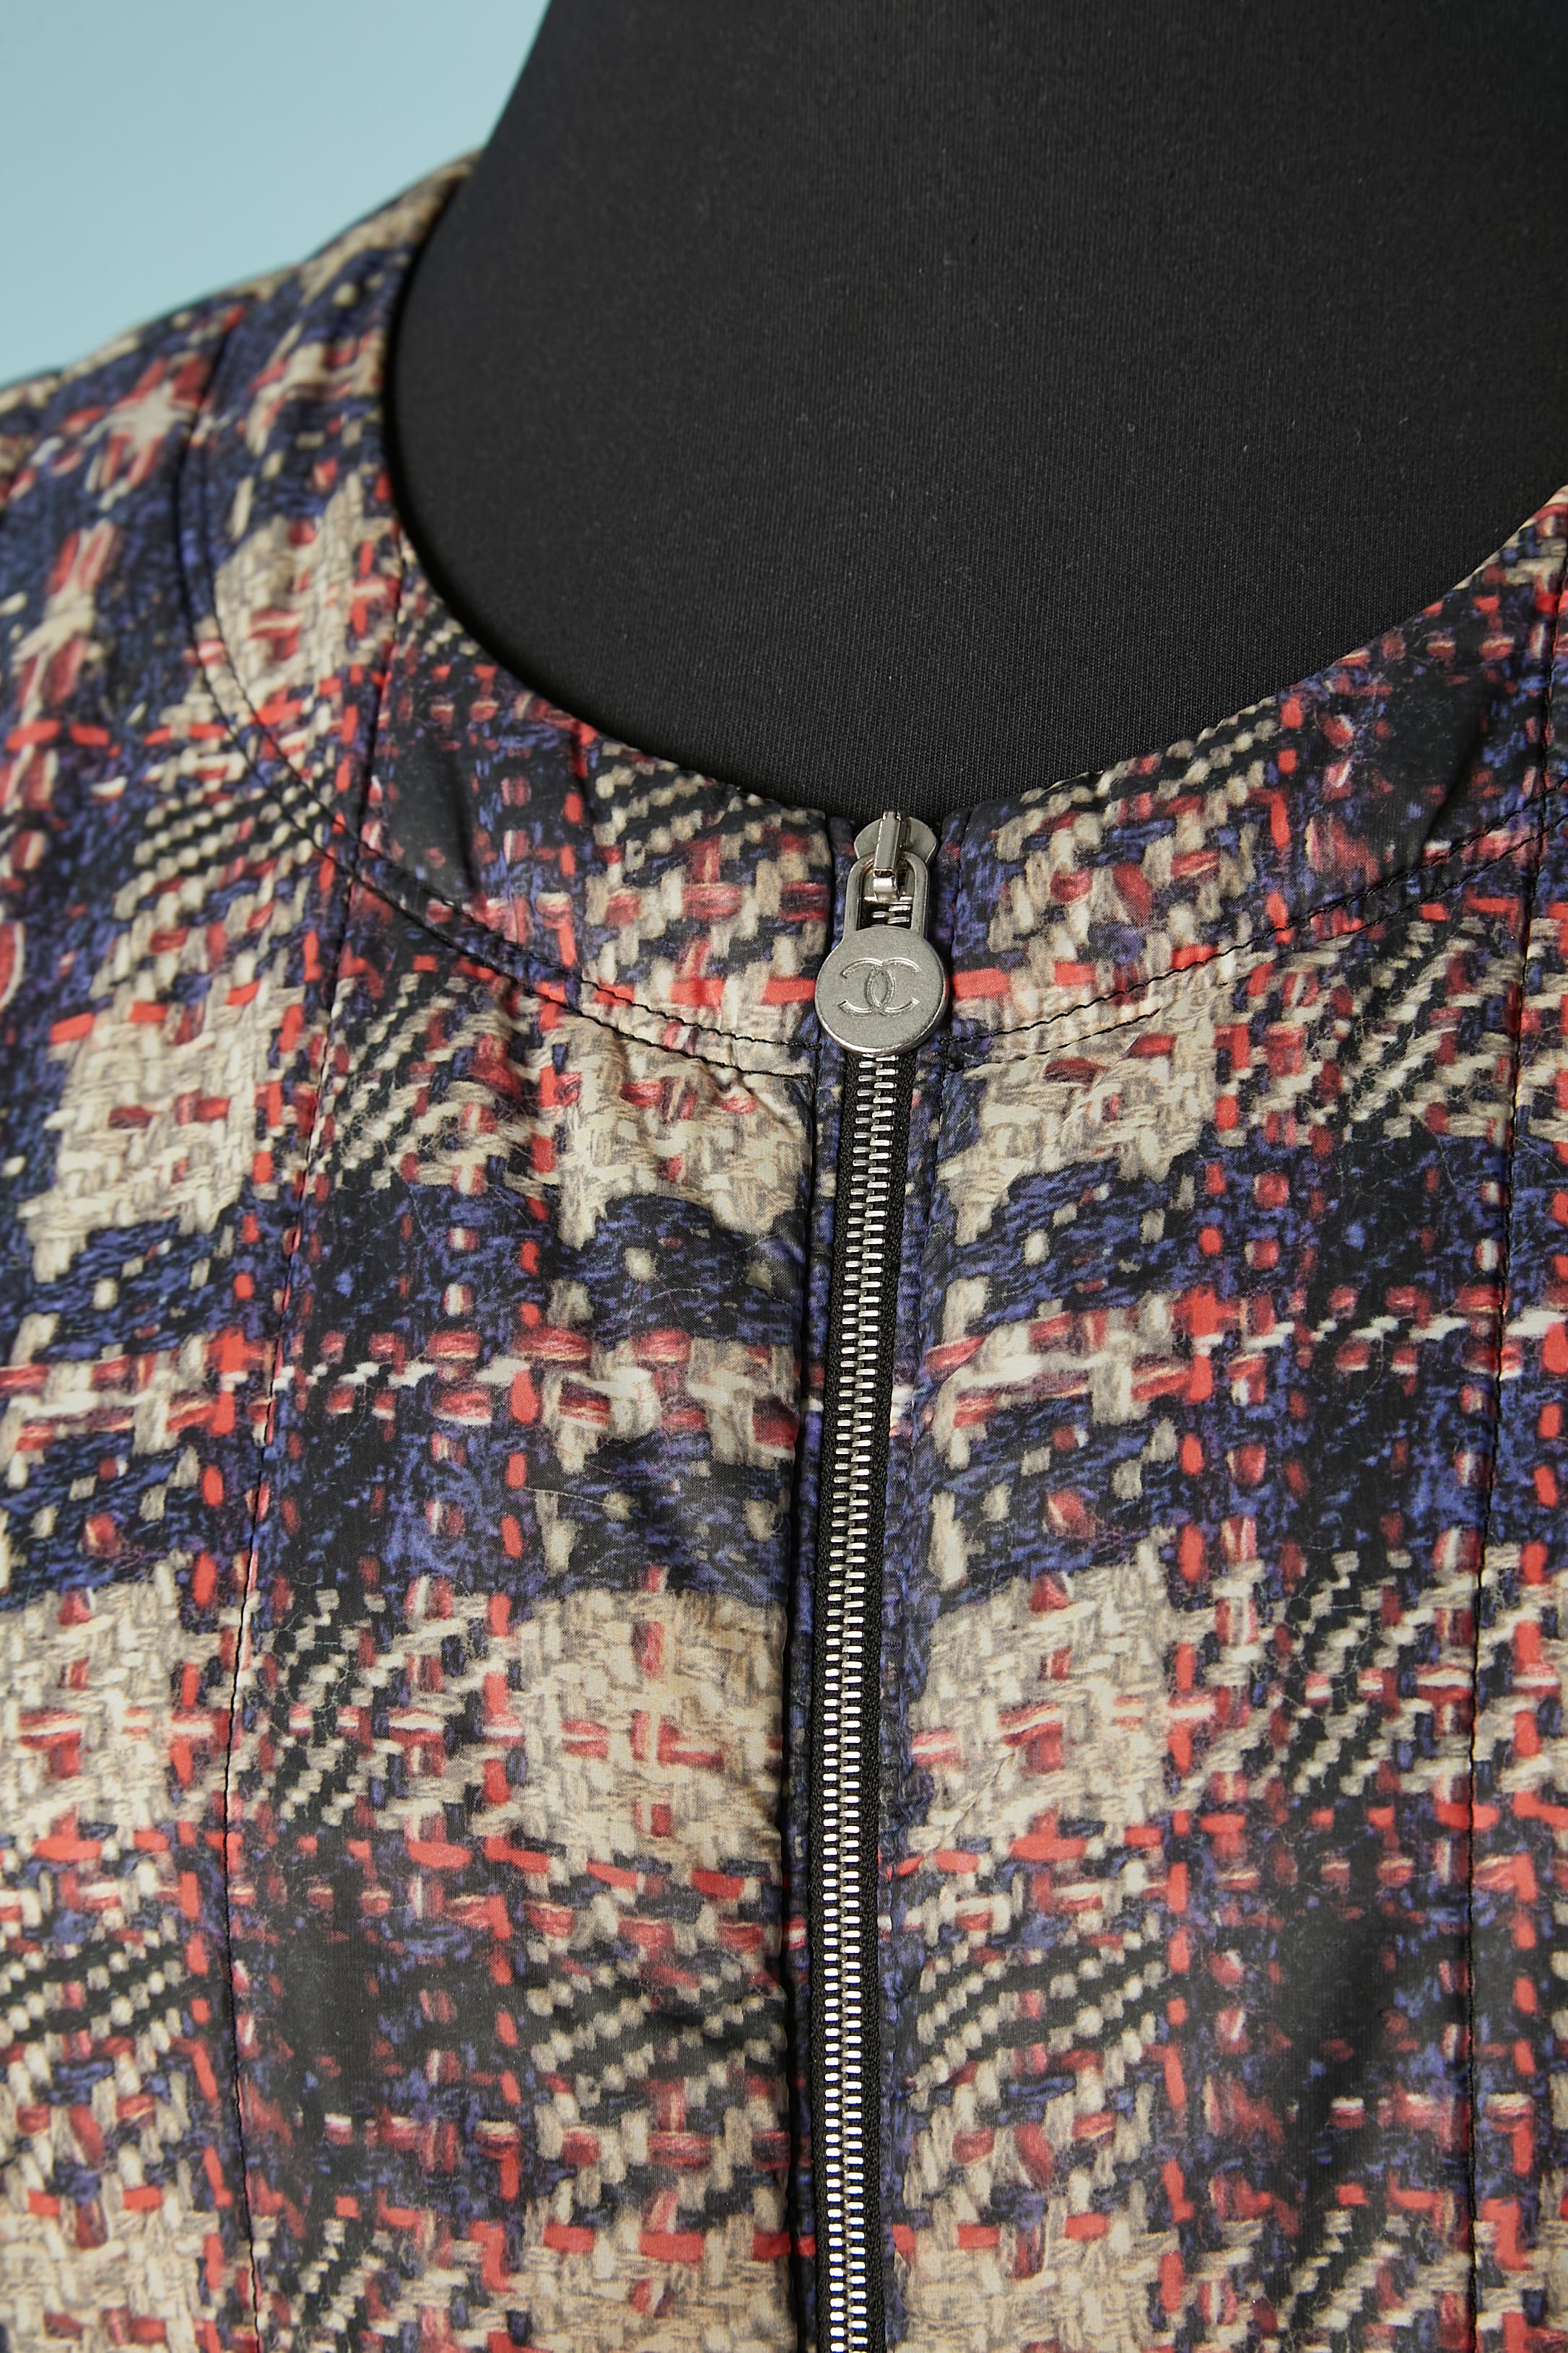 Thin down jacket with tweed print, pockets and zip. Branded snaps on pockets and cuffs. 4 pockets. Zip in the middle front with branded zip-puller.Chain inside the jacket in the bottom. 
Fabric composition: 100% polyamide. Burgundy lining: 98%